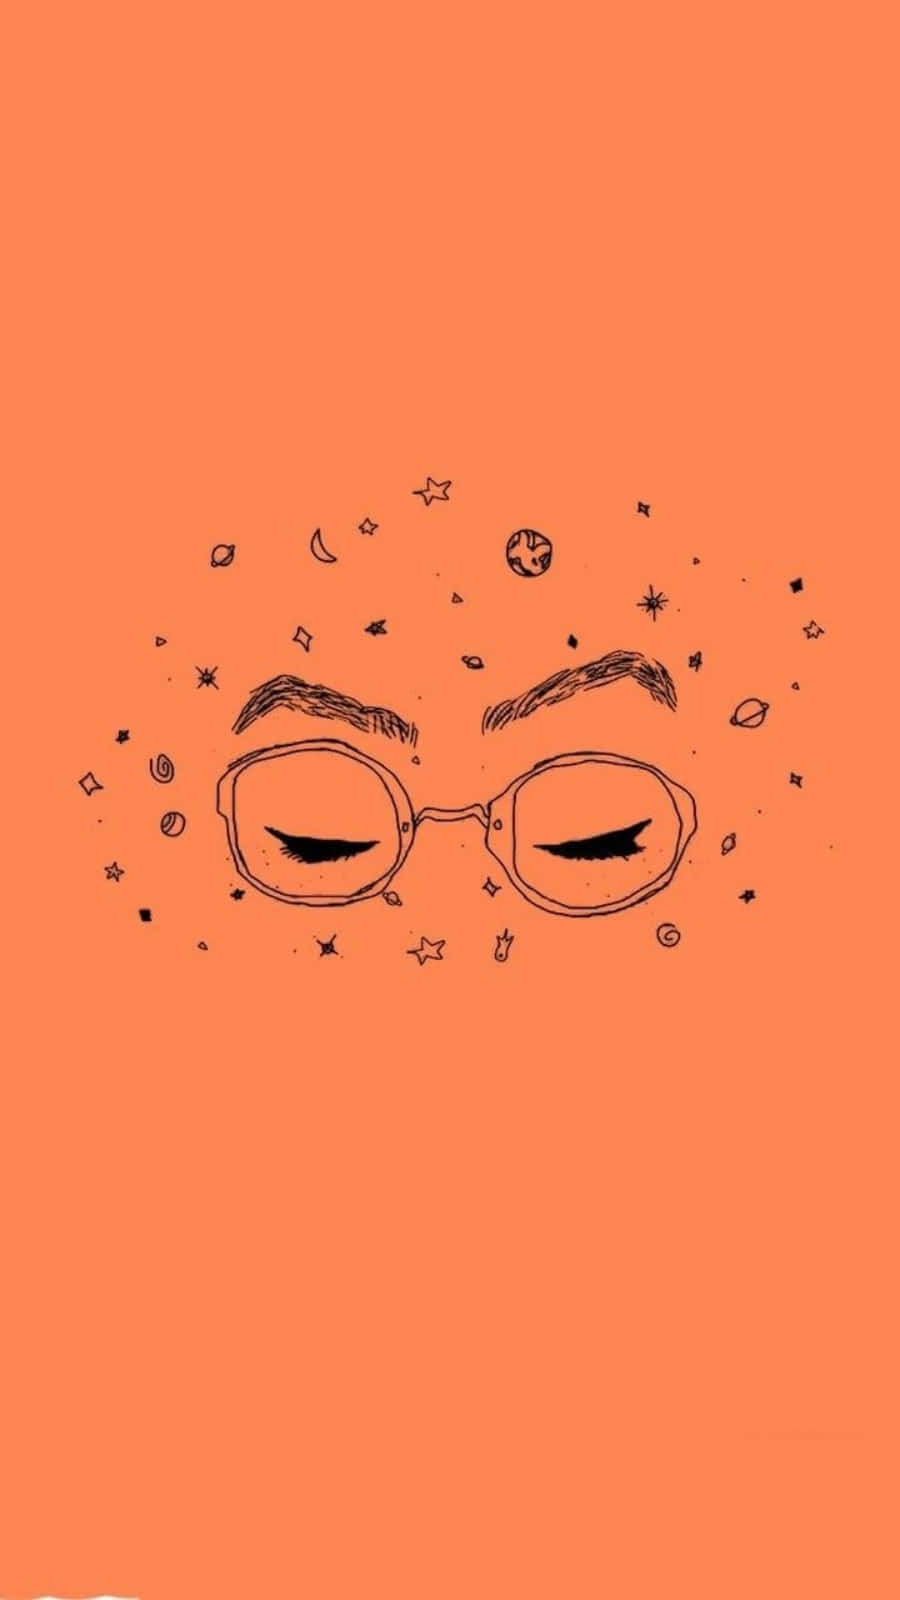 A drawing of an eye with glasses and stars - Pastel orange